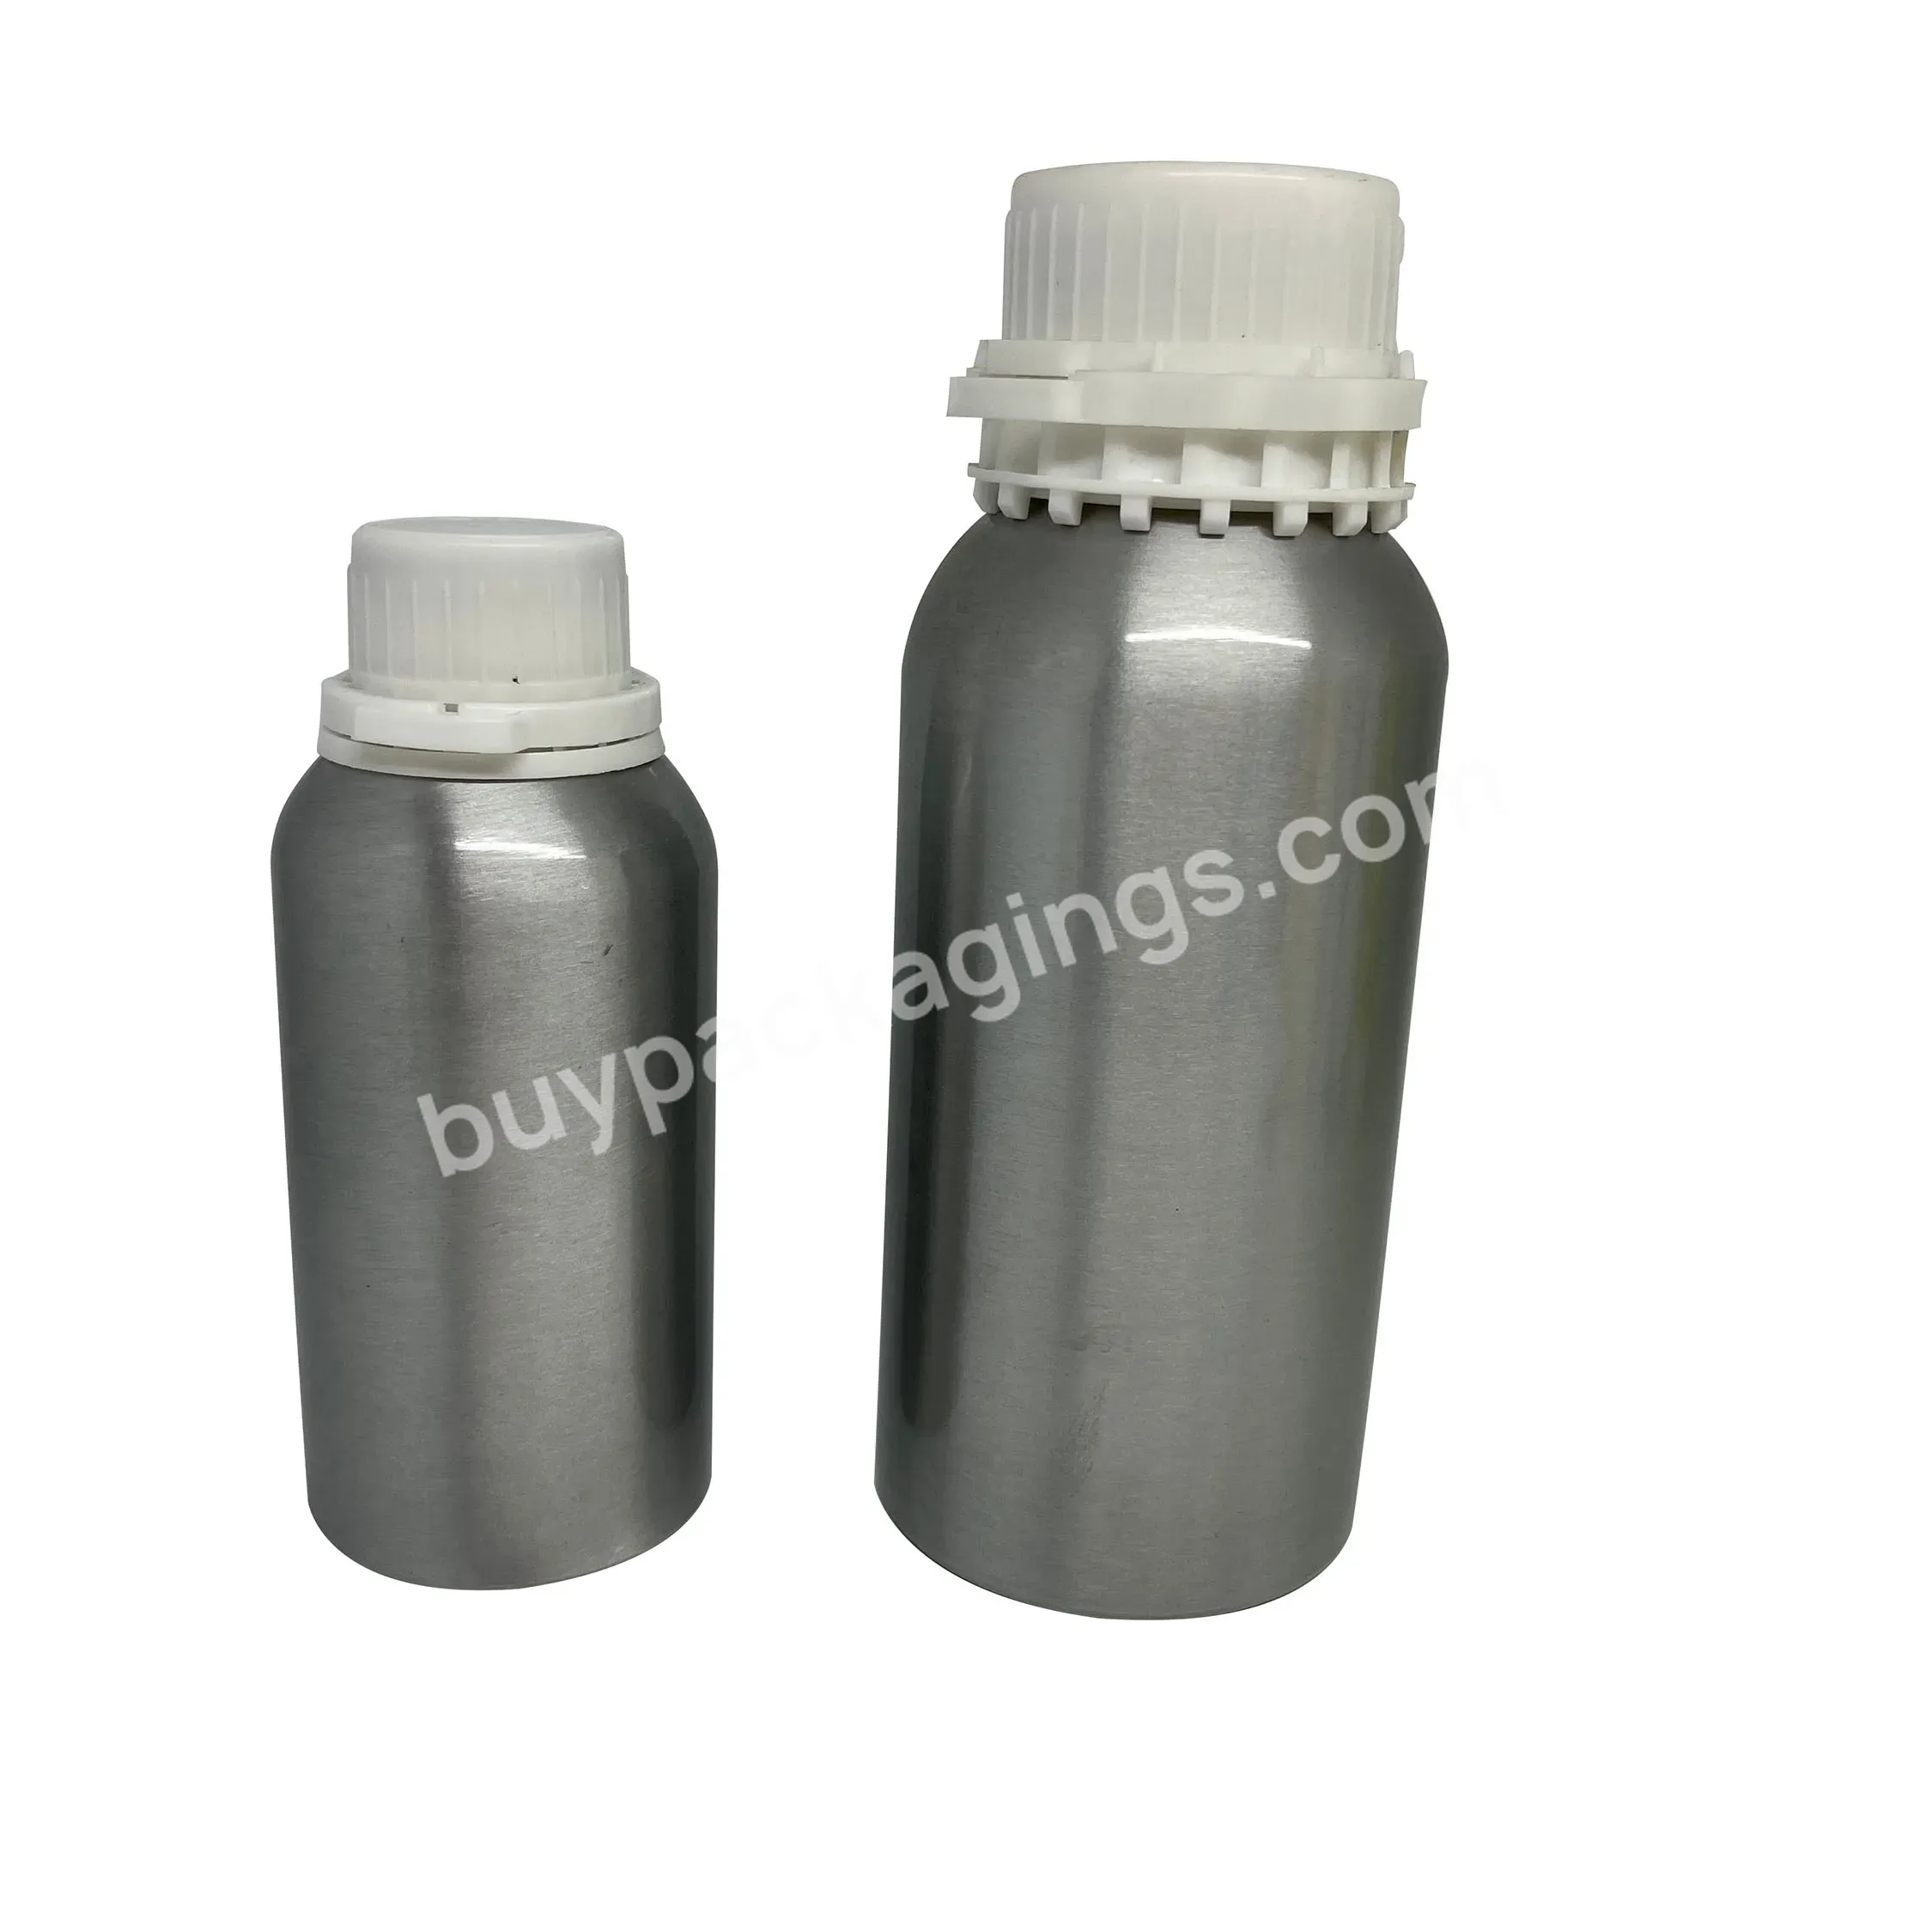 500/1000/1250ml Hot Sale Polished Anti-theft Lid Aluminum Bottle Round Silver Anti-theft Lid Chemical Bottle - Buy 500/1000/1250ml Hot Sale Polished Anti-theft Lid Aluminum Bottle,Round Silver Anti-theft Lid Chemical Bottle,Chemical Bottle.